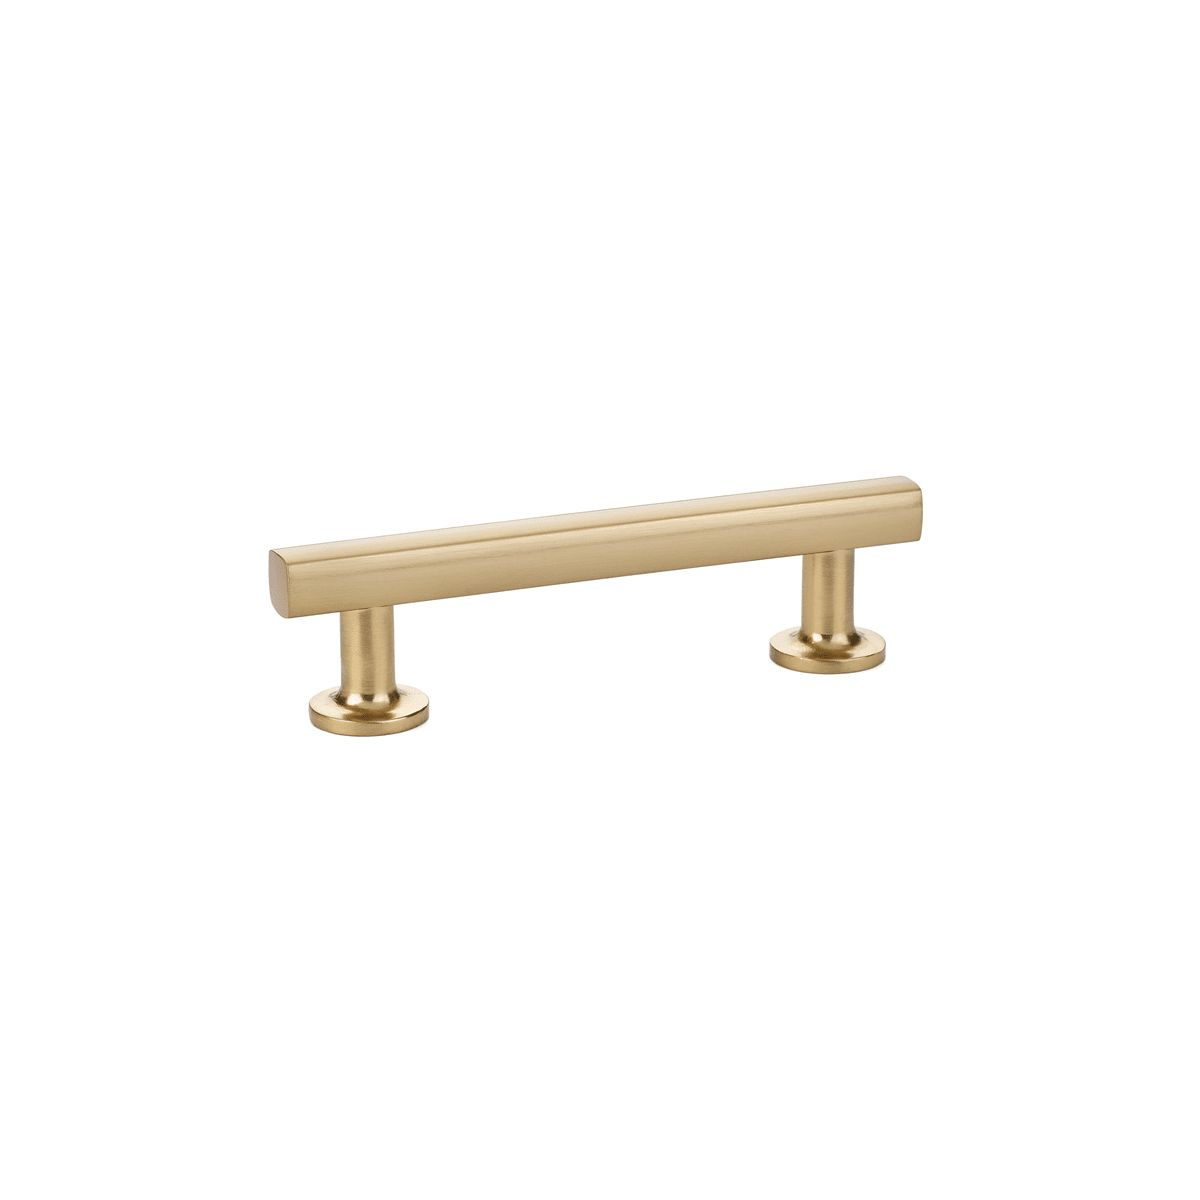 Freestone 4 Inch Center to Center Bar Cabinet Pull from the Urban Modern Collection | Build.com, Inc.